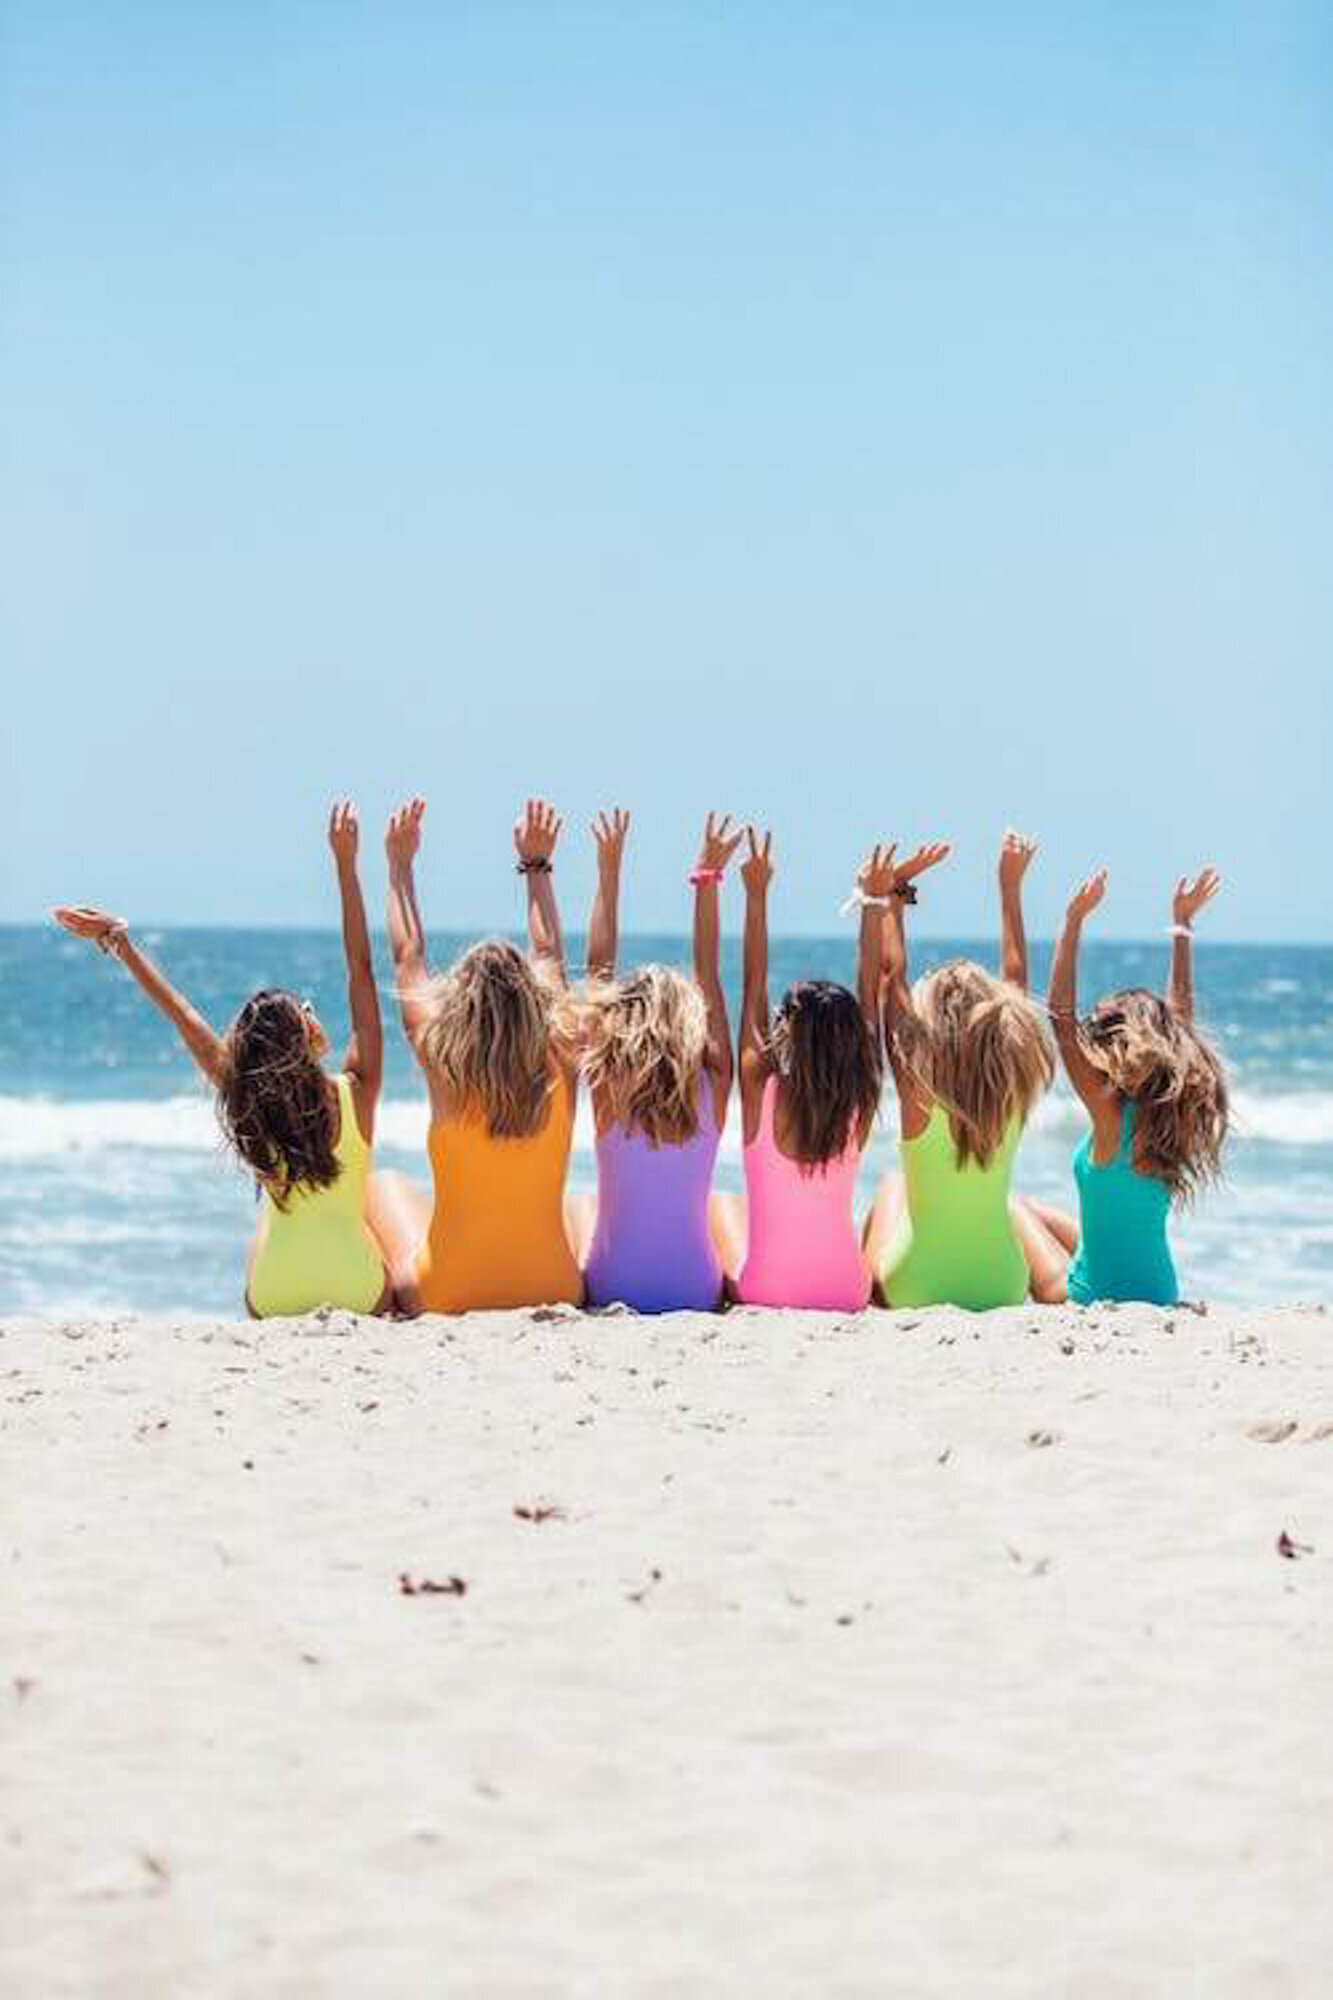 Group of friends taking photo wearing their colorful swimsuits by the seashore